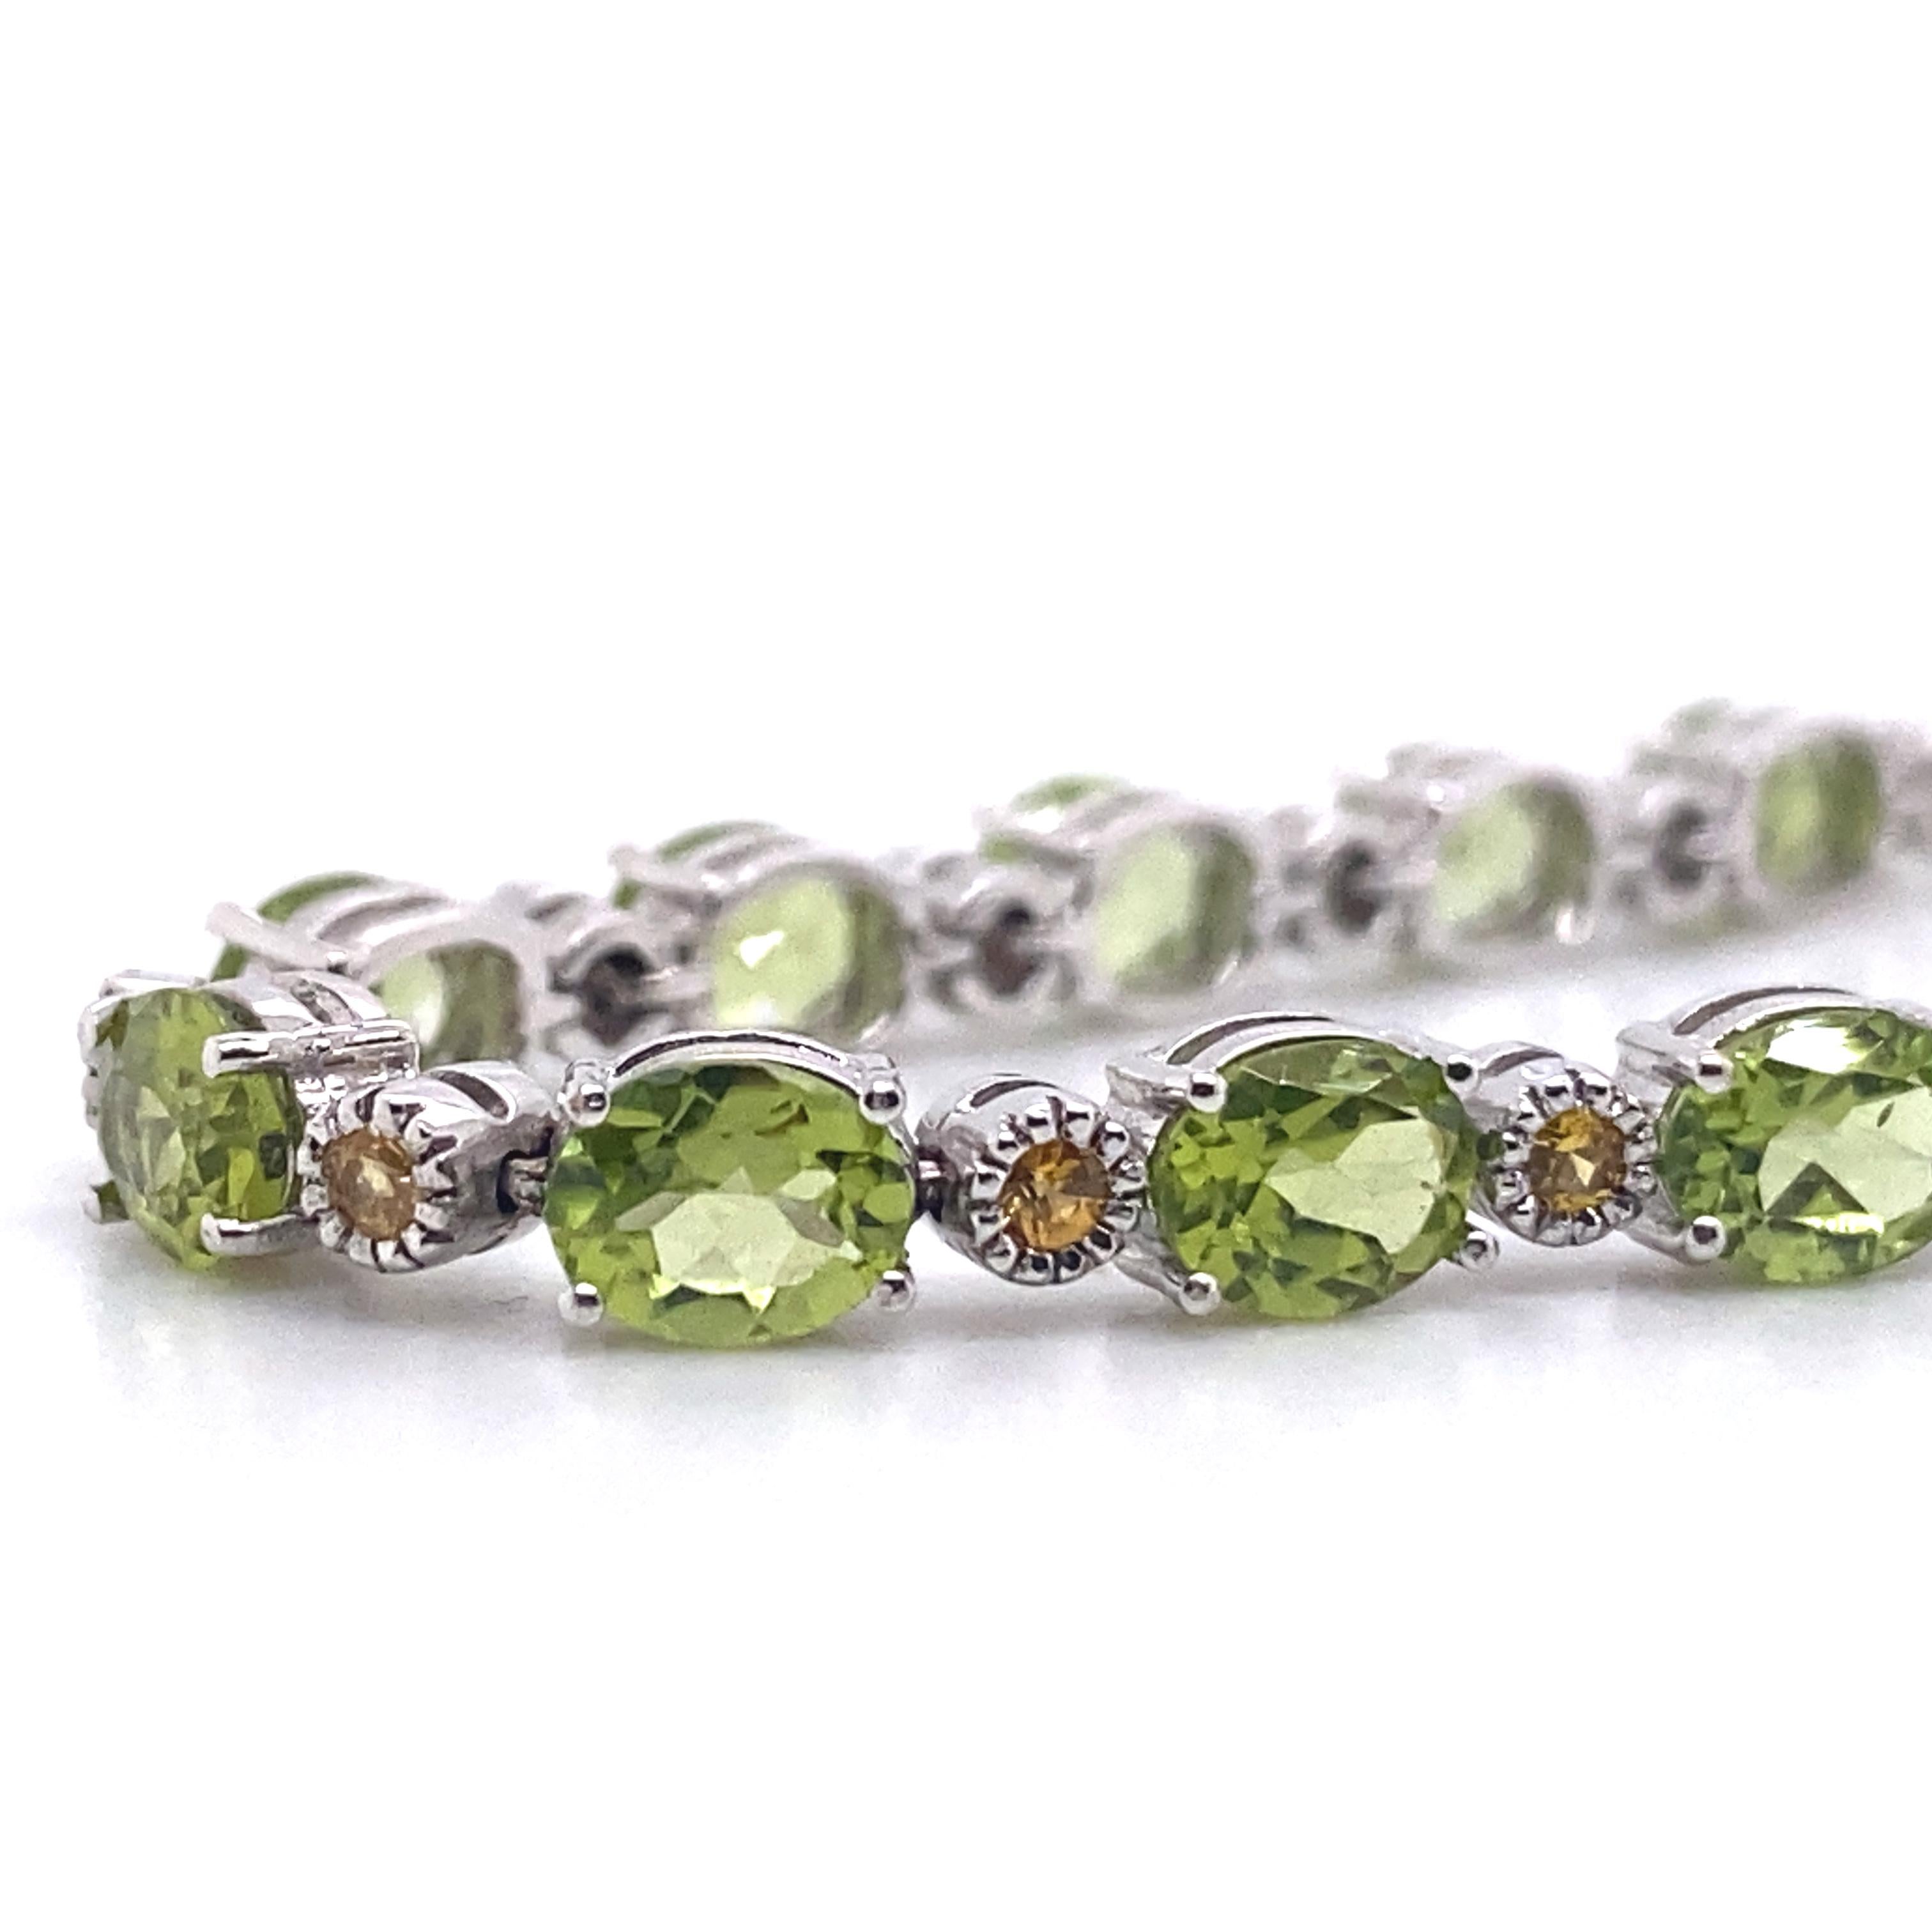 This gorgeous tennis bracelet features 7 carats of peridot and .30 carats of cognac diamonds set in stunning 18-karat white gold. The bracelet is 18 cm long. It was hand-made using traditional methods and designed and produced in Palermo, Sicily by